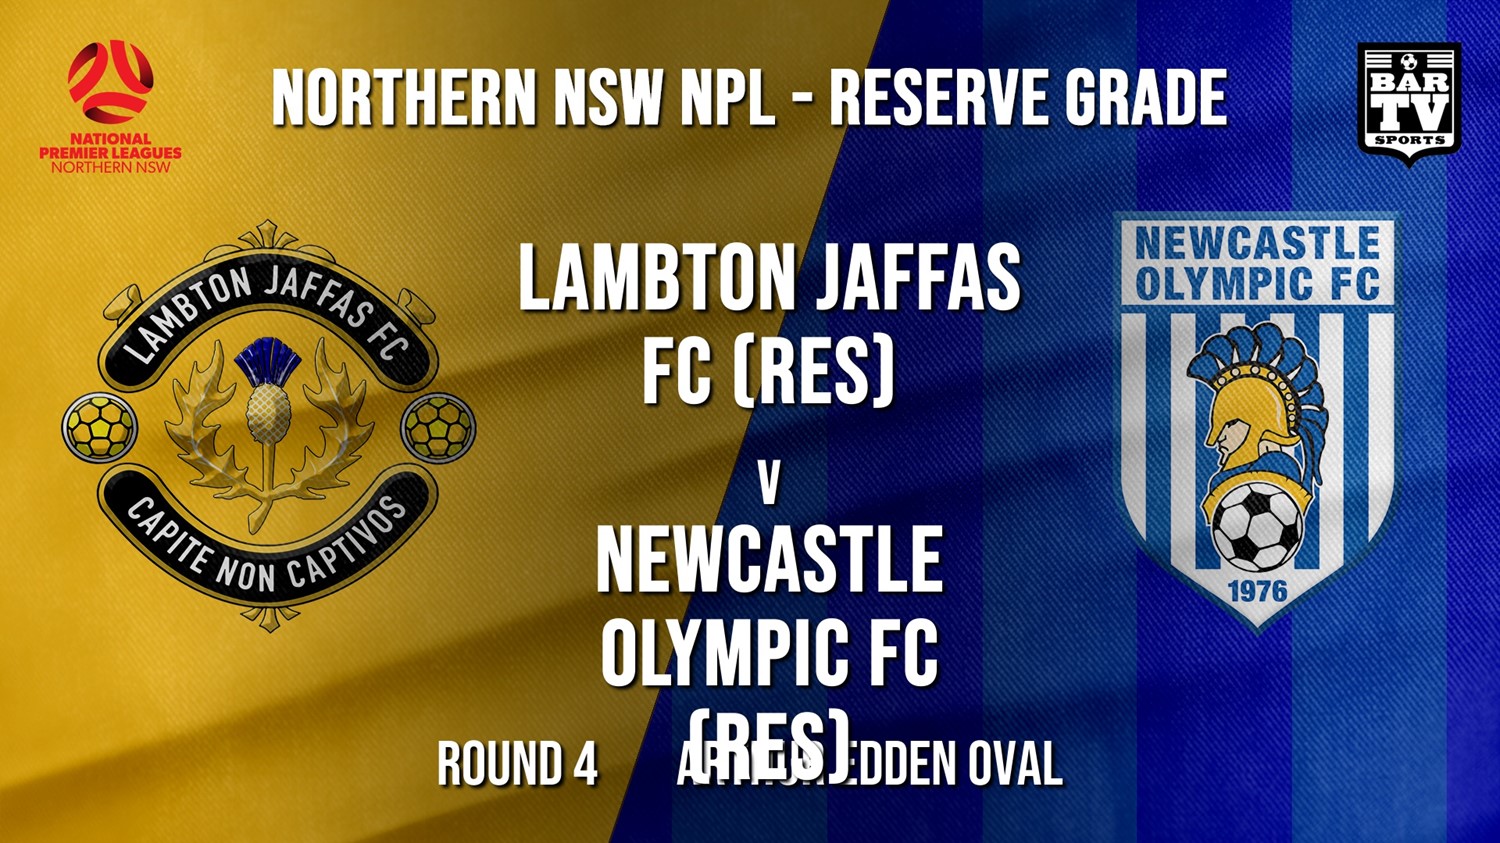 NPL NNSW RES Round 4 - Lambton Jaffas FC (Res) v Newcastle Olympic FC (Res) Minigame Slate Image